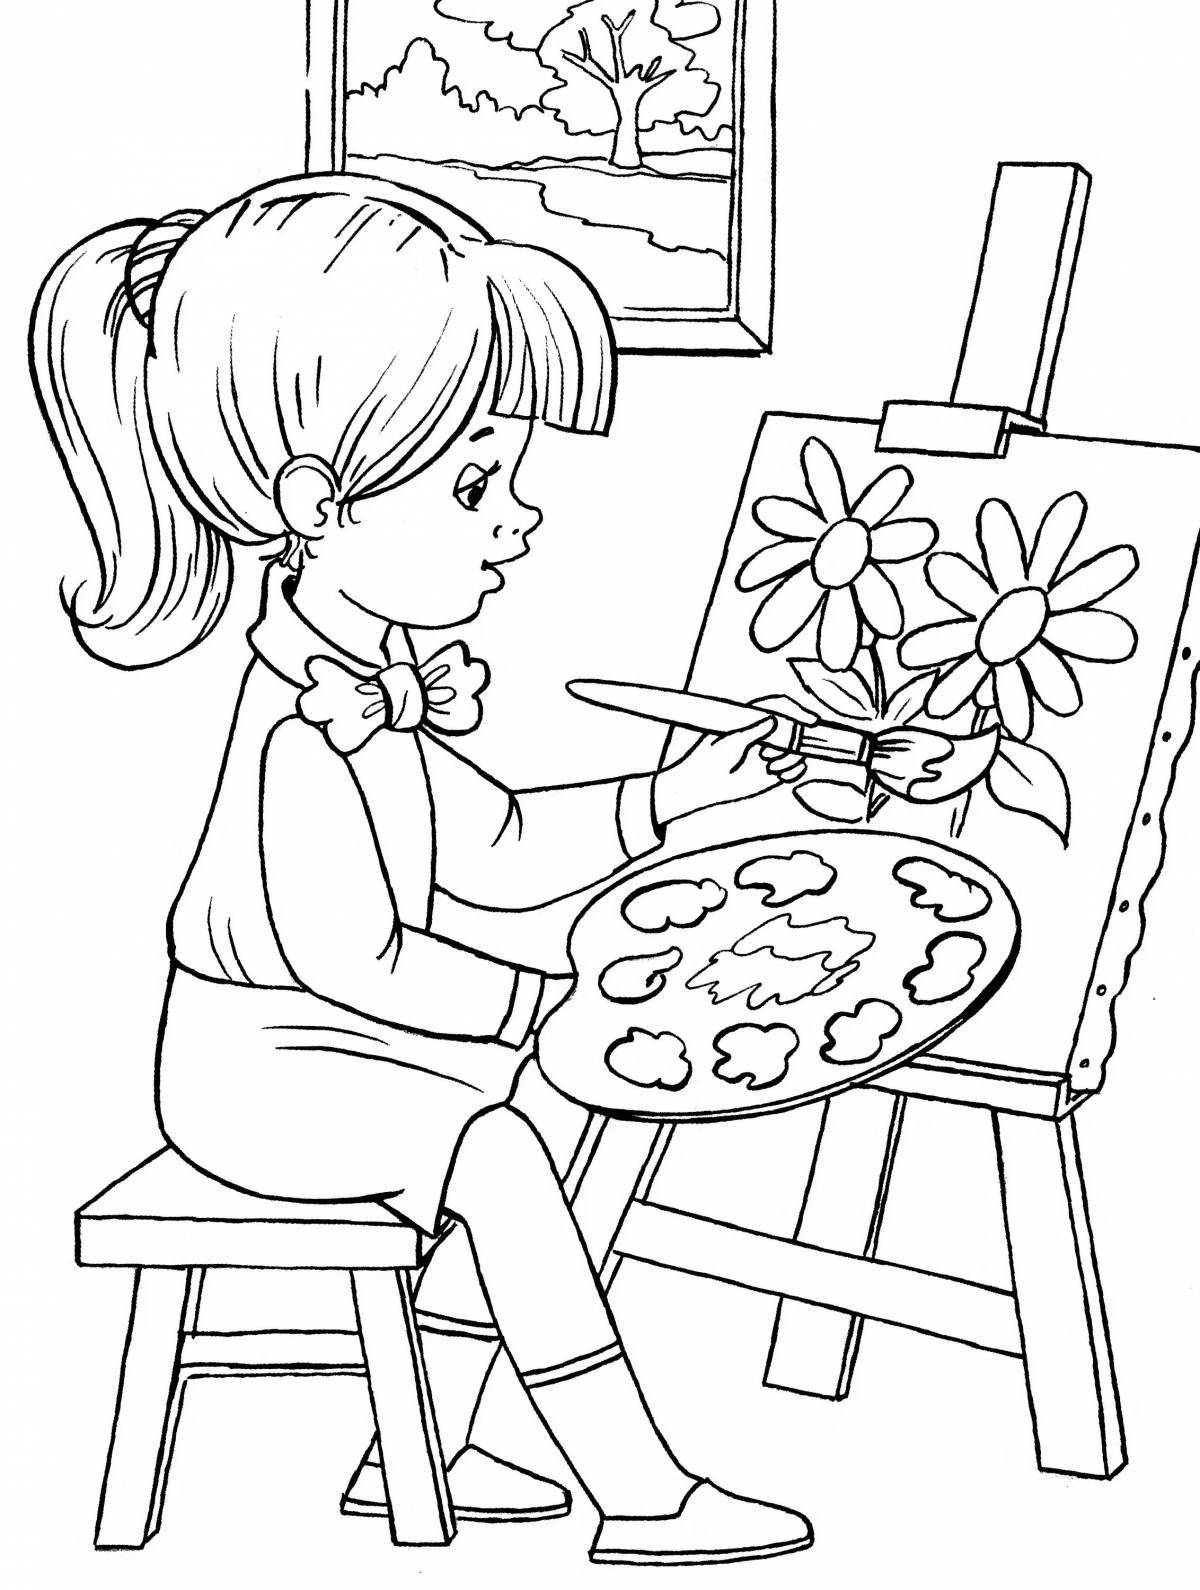 Playful coloring for toddlers